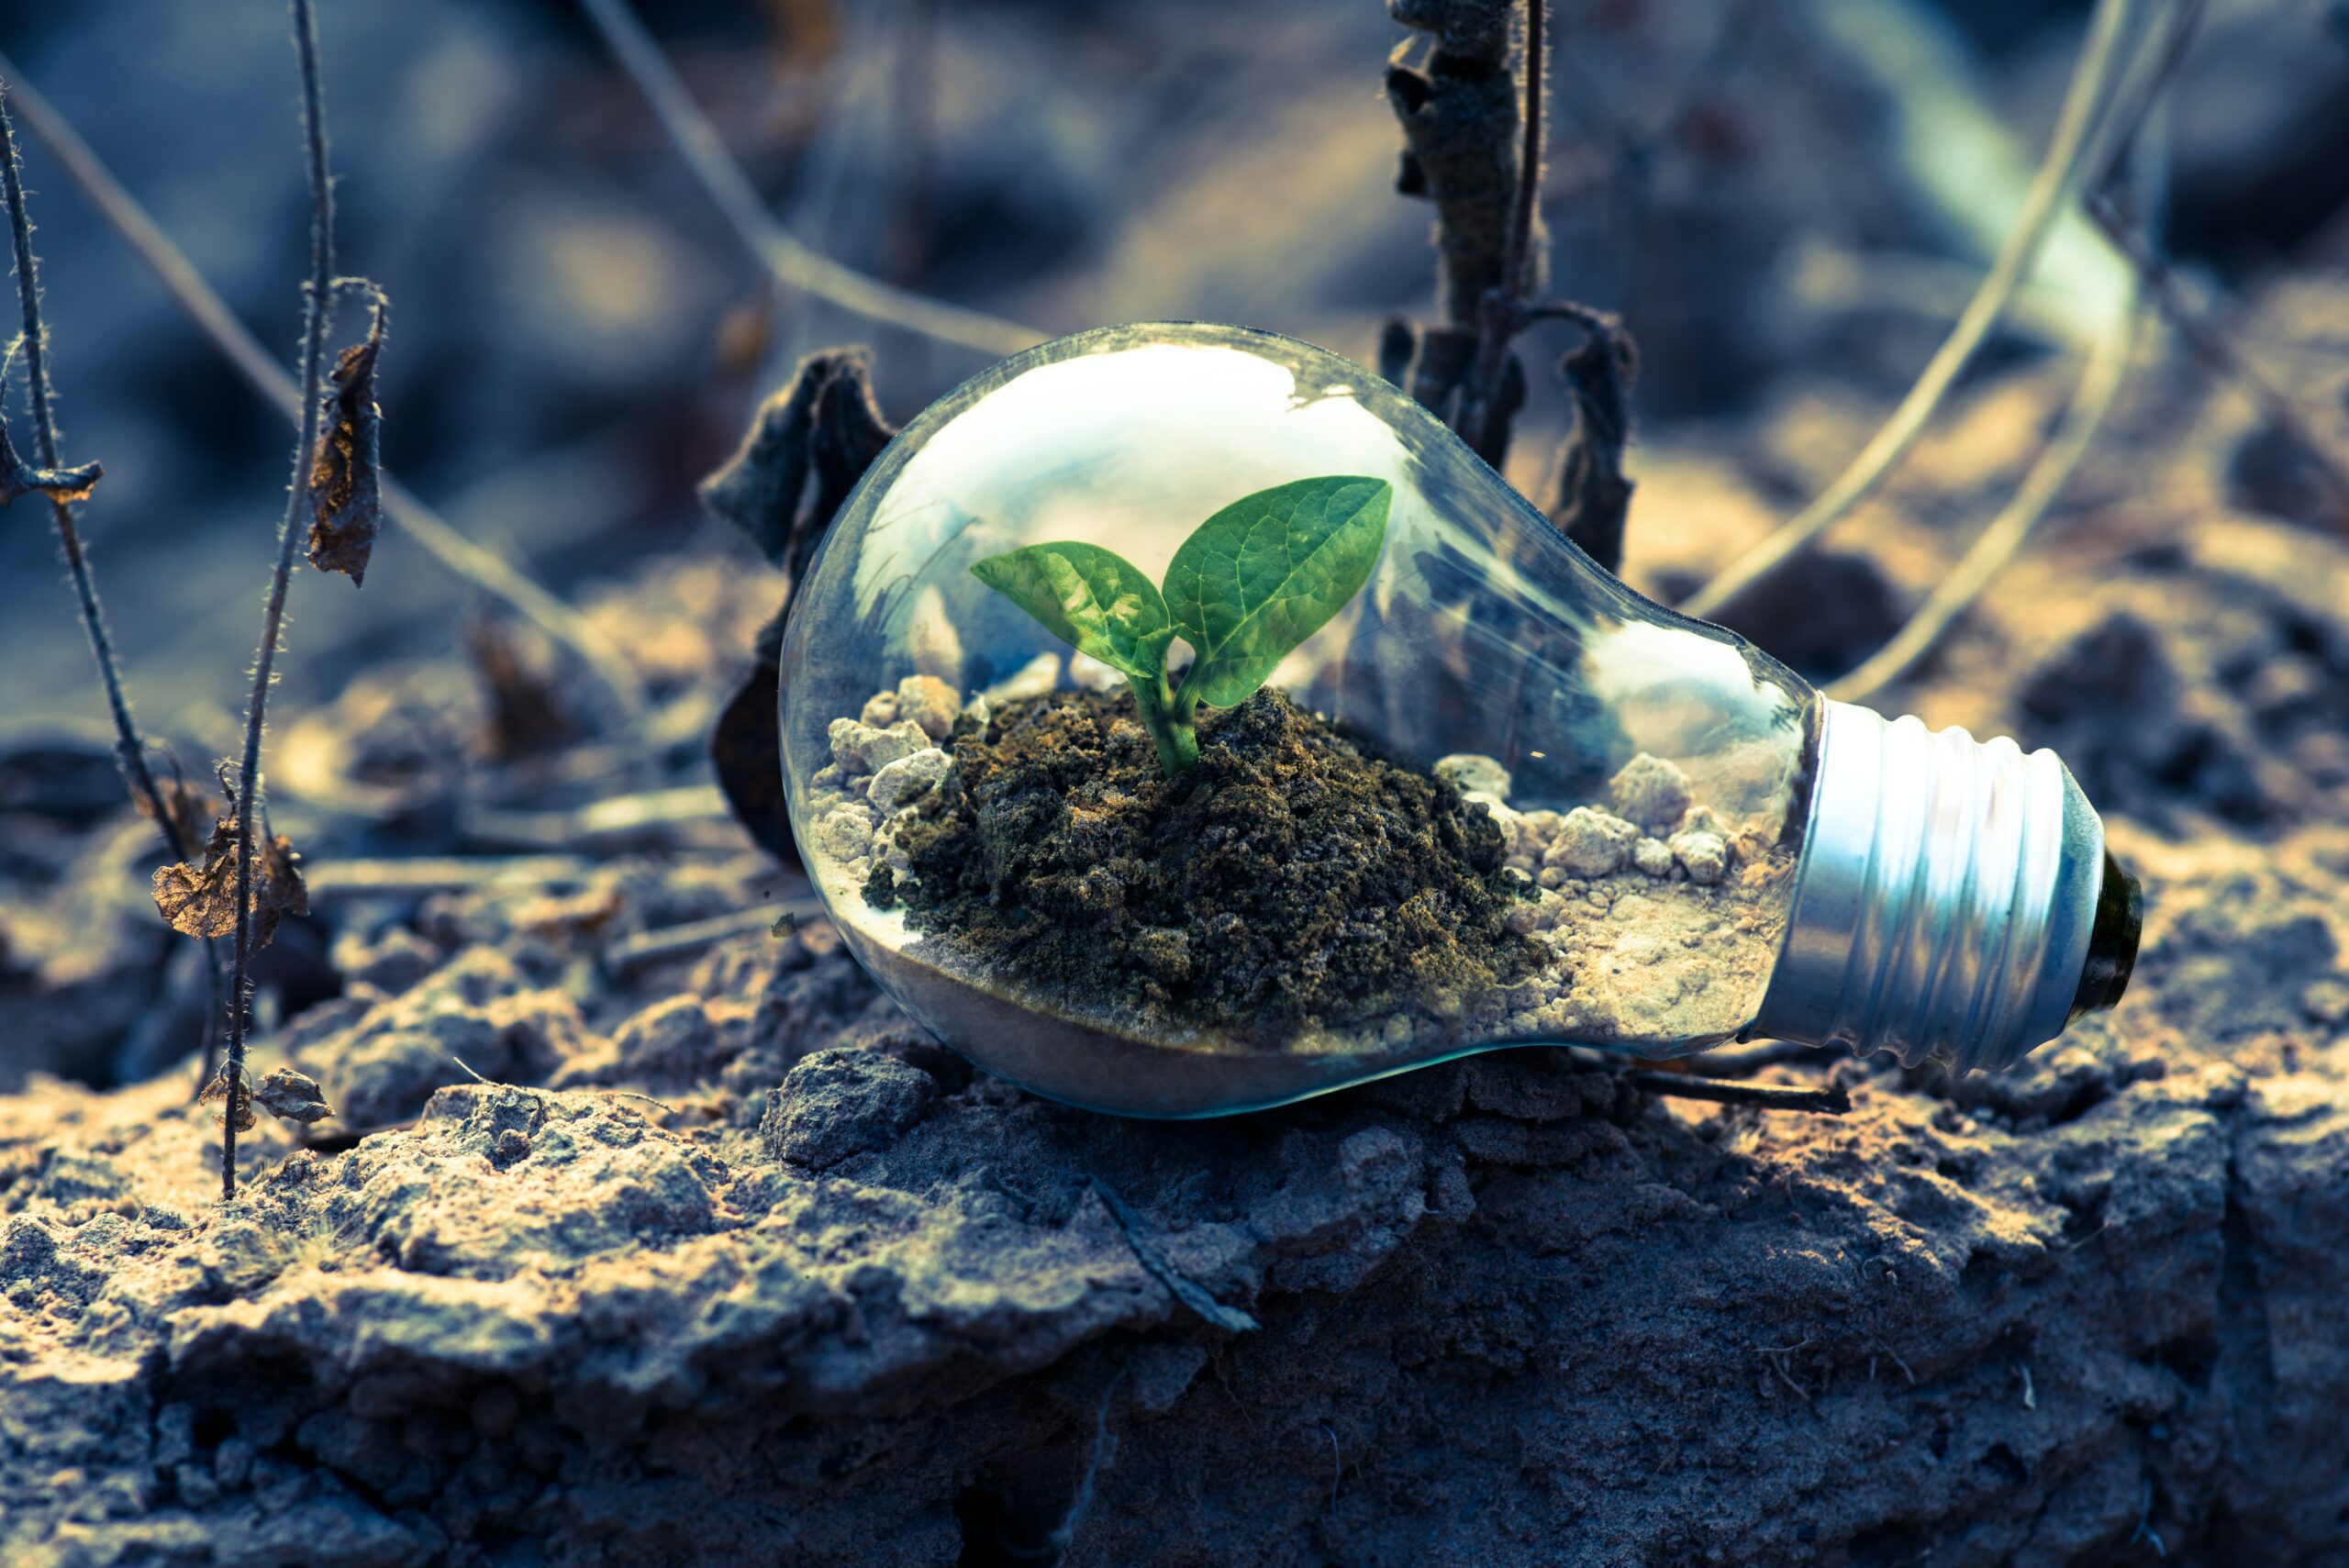 Light Bulb With Green Plant Growing Inside Over Dry Soil